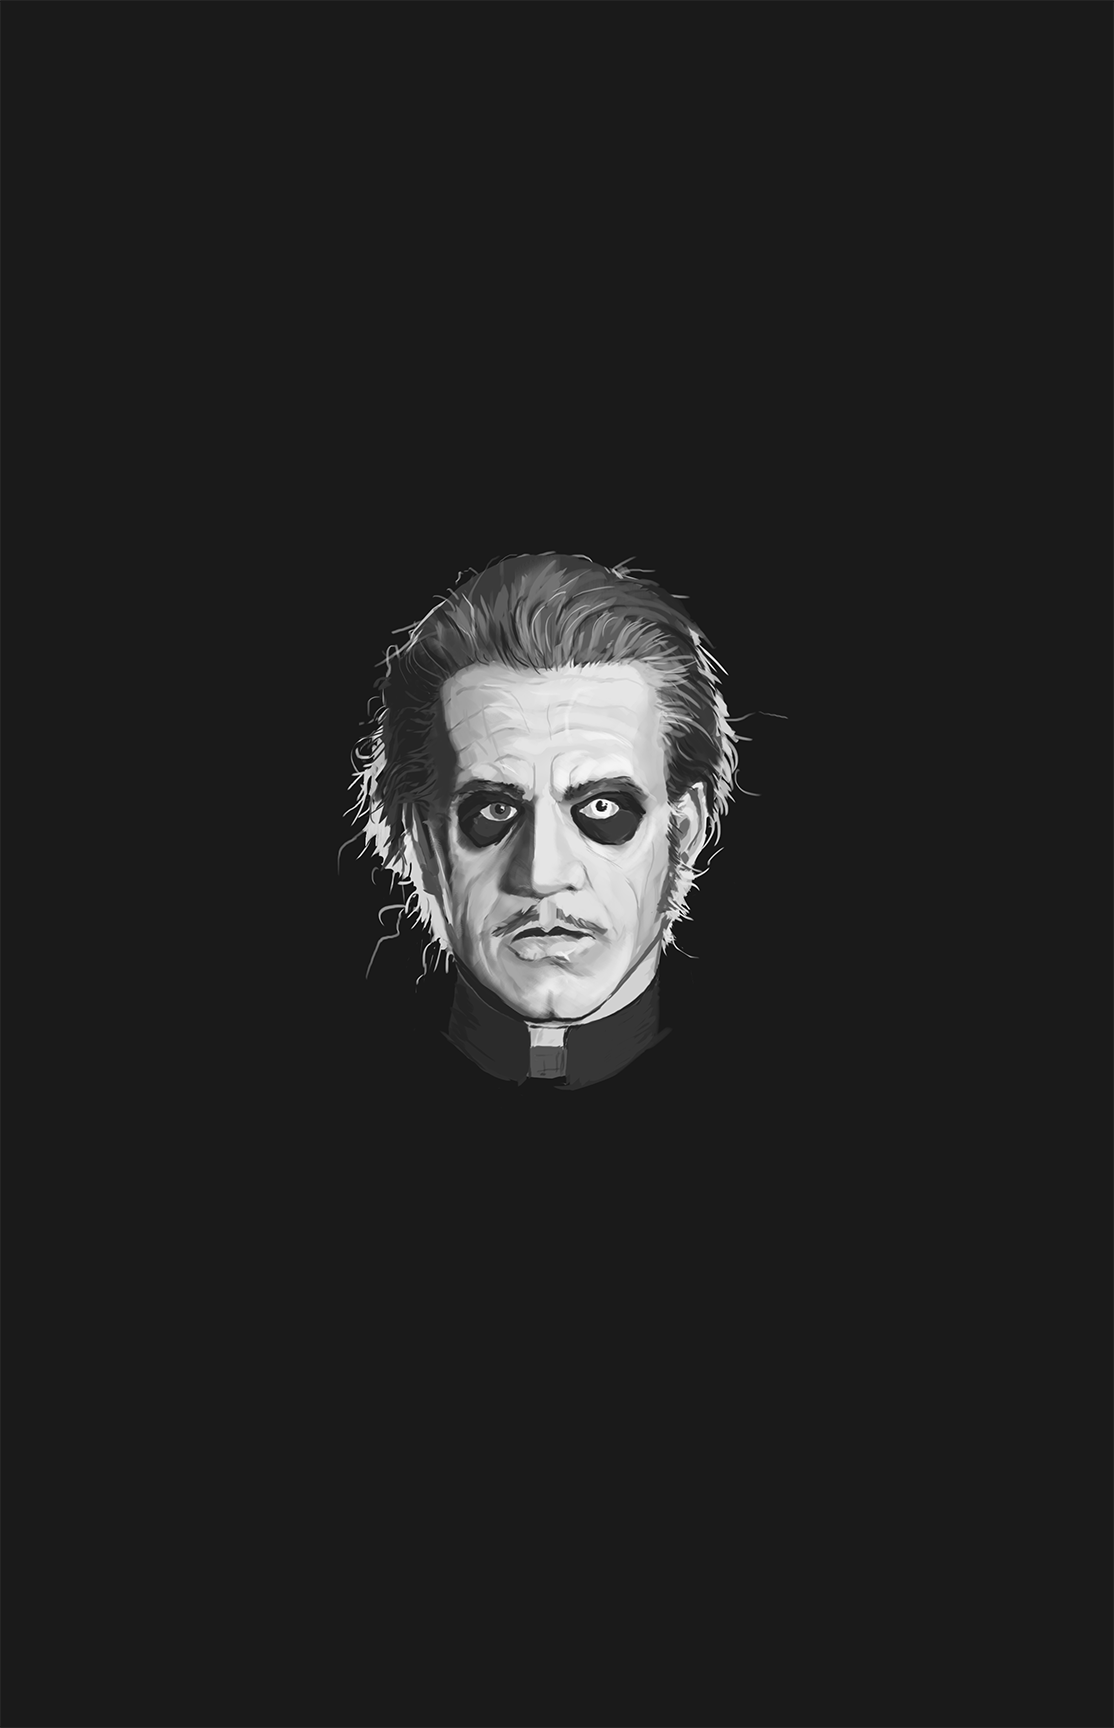 Ghost - My, Rock, Musical group, Musicians, Drawing, Digital drawing, Portrait, Ghost BC, Art